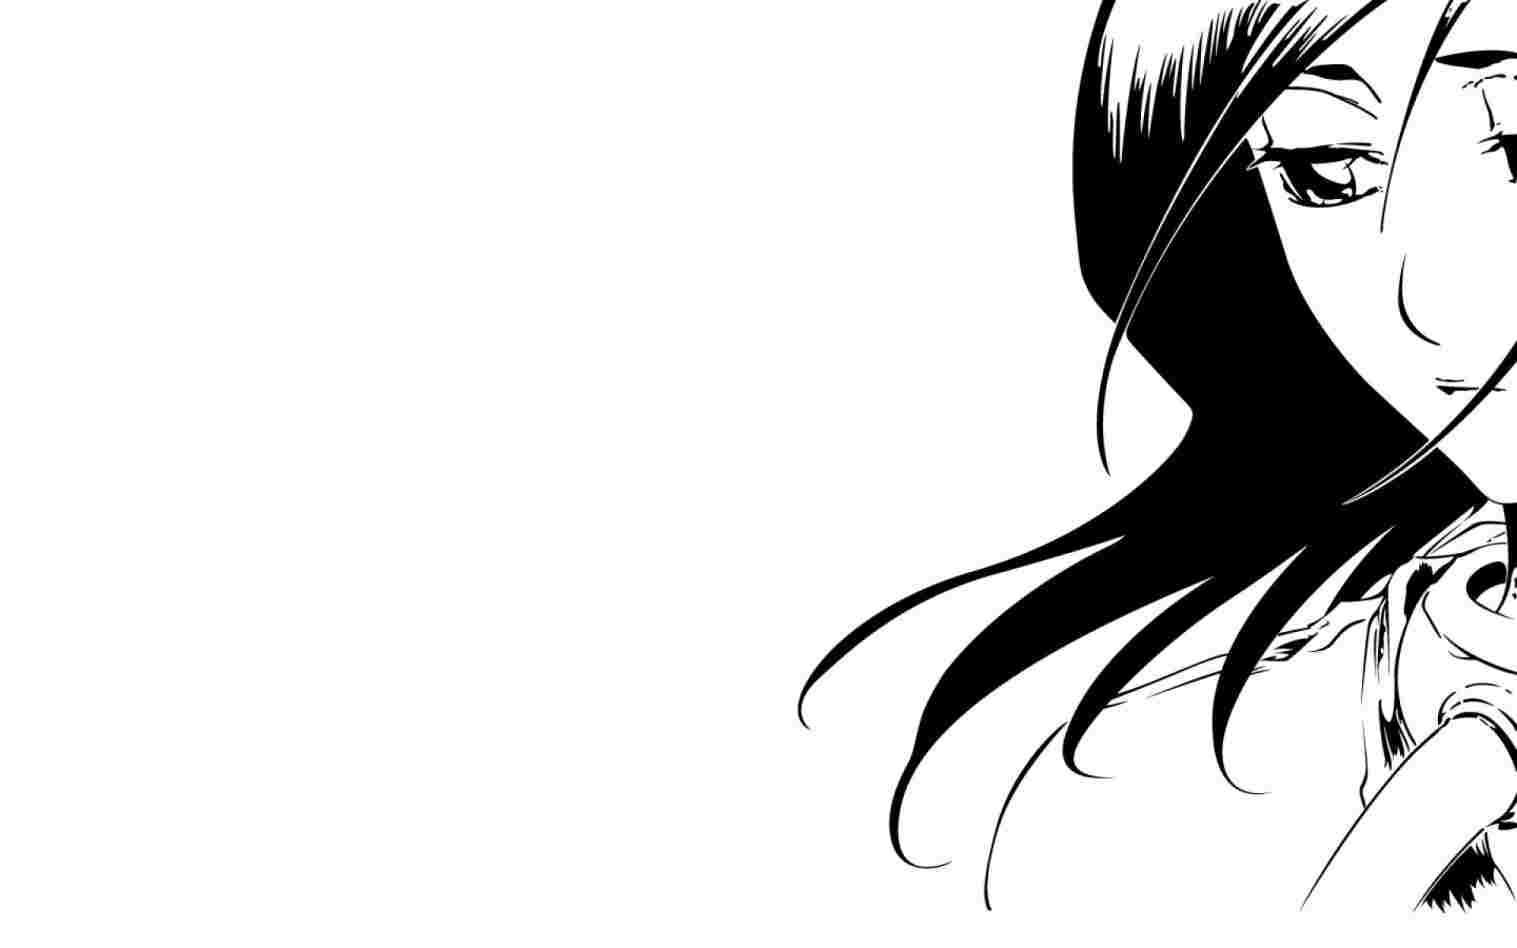 Pencil Sketch Cute Girl Hd Wallpapers 1080p Black And